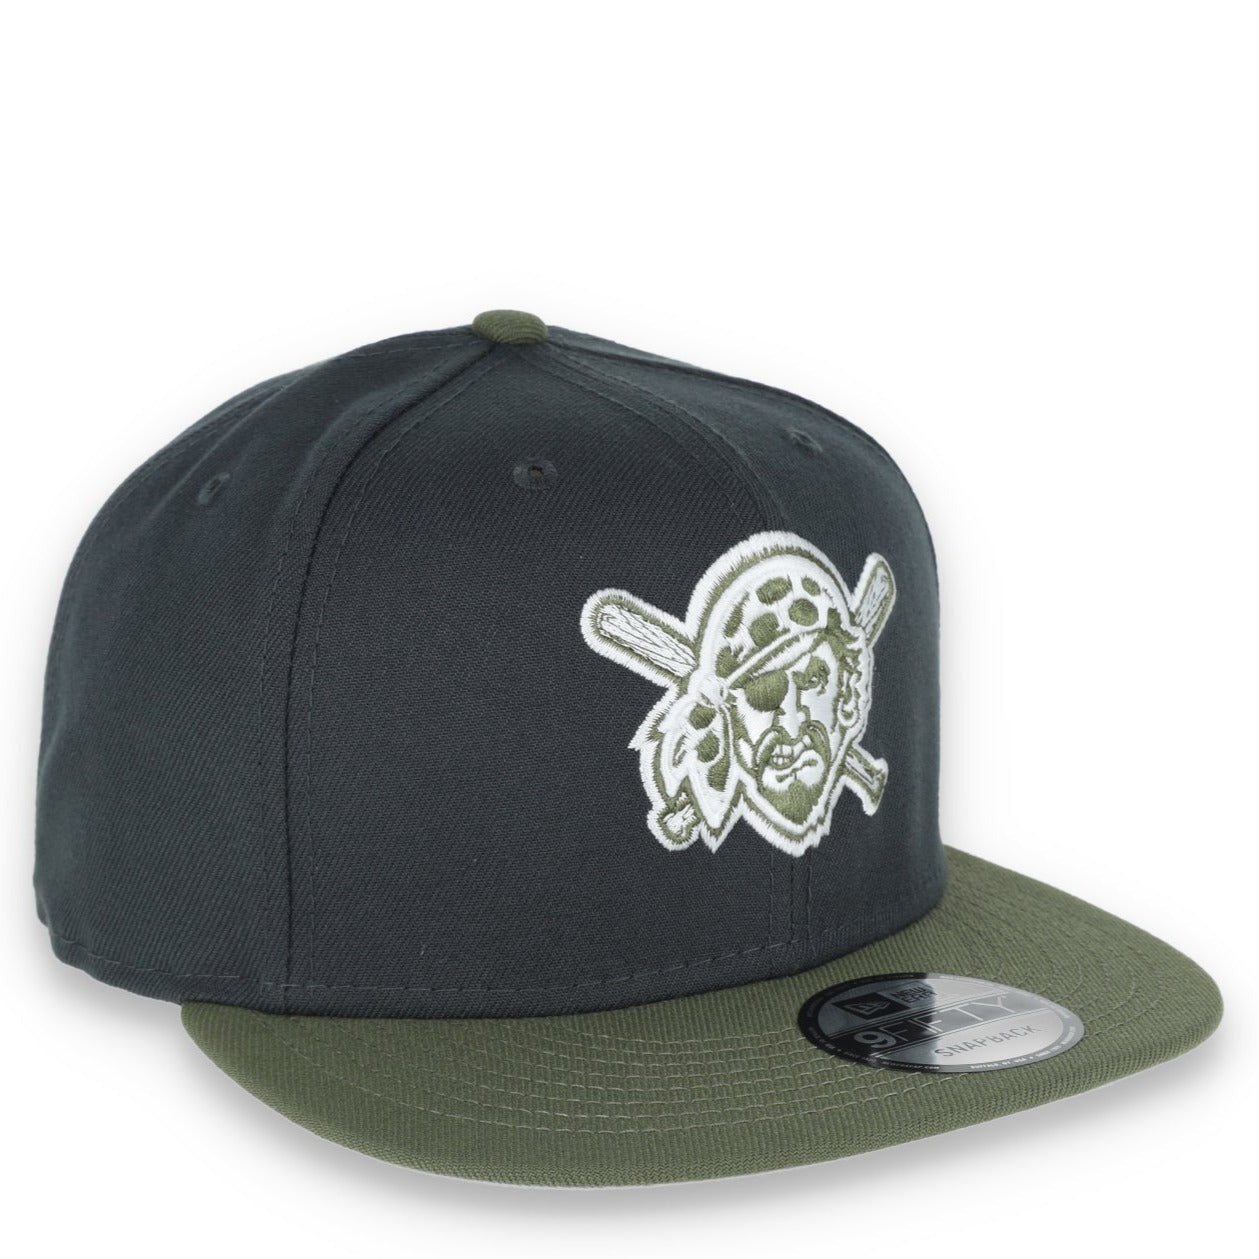 New Era Pittsburgh Pirates 2-Tone Color Pack 9FIFTY Snapback Hat - Grey/Olive